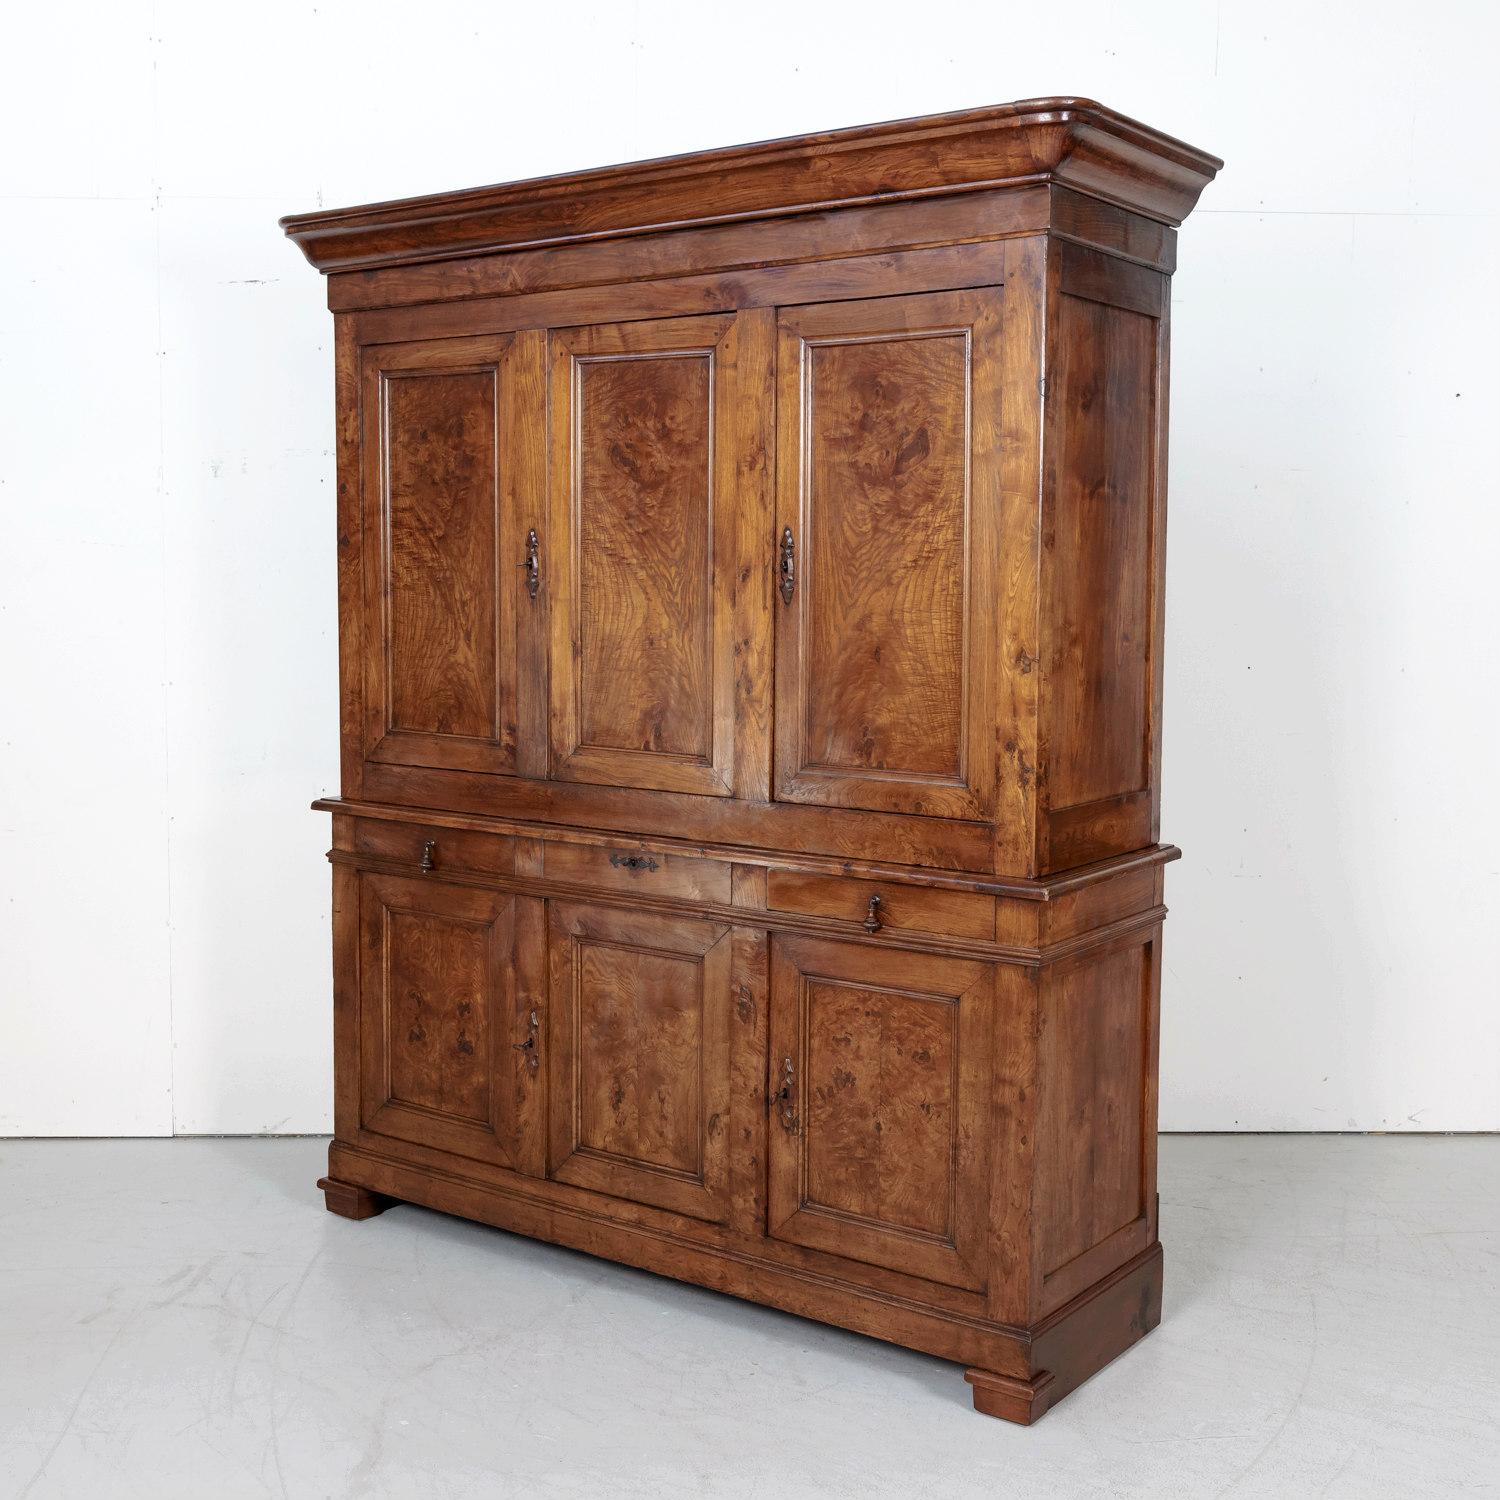 Large 19th century French Louis Philippe period buffet deux corps handcrafted of chestnut and burled chestnut, circa 1840s. The upper cabinet, having a doucine crown above three burled chestnut panel doors, opens to reveal an interior shelf with